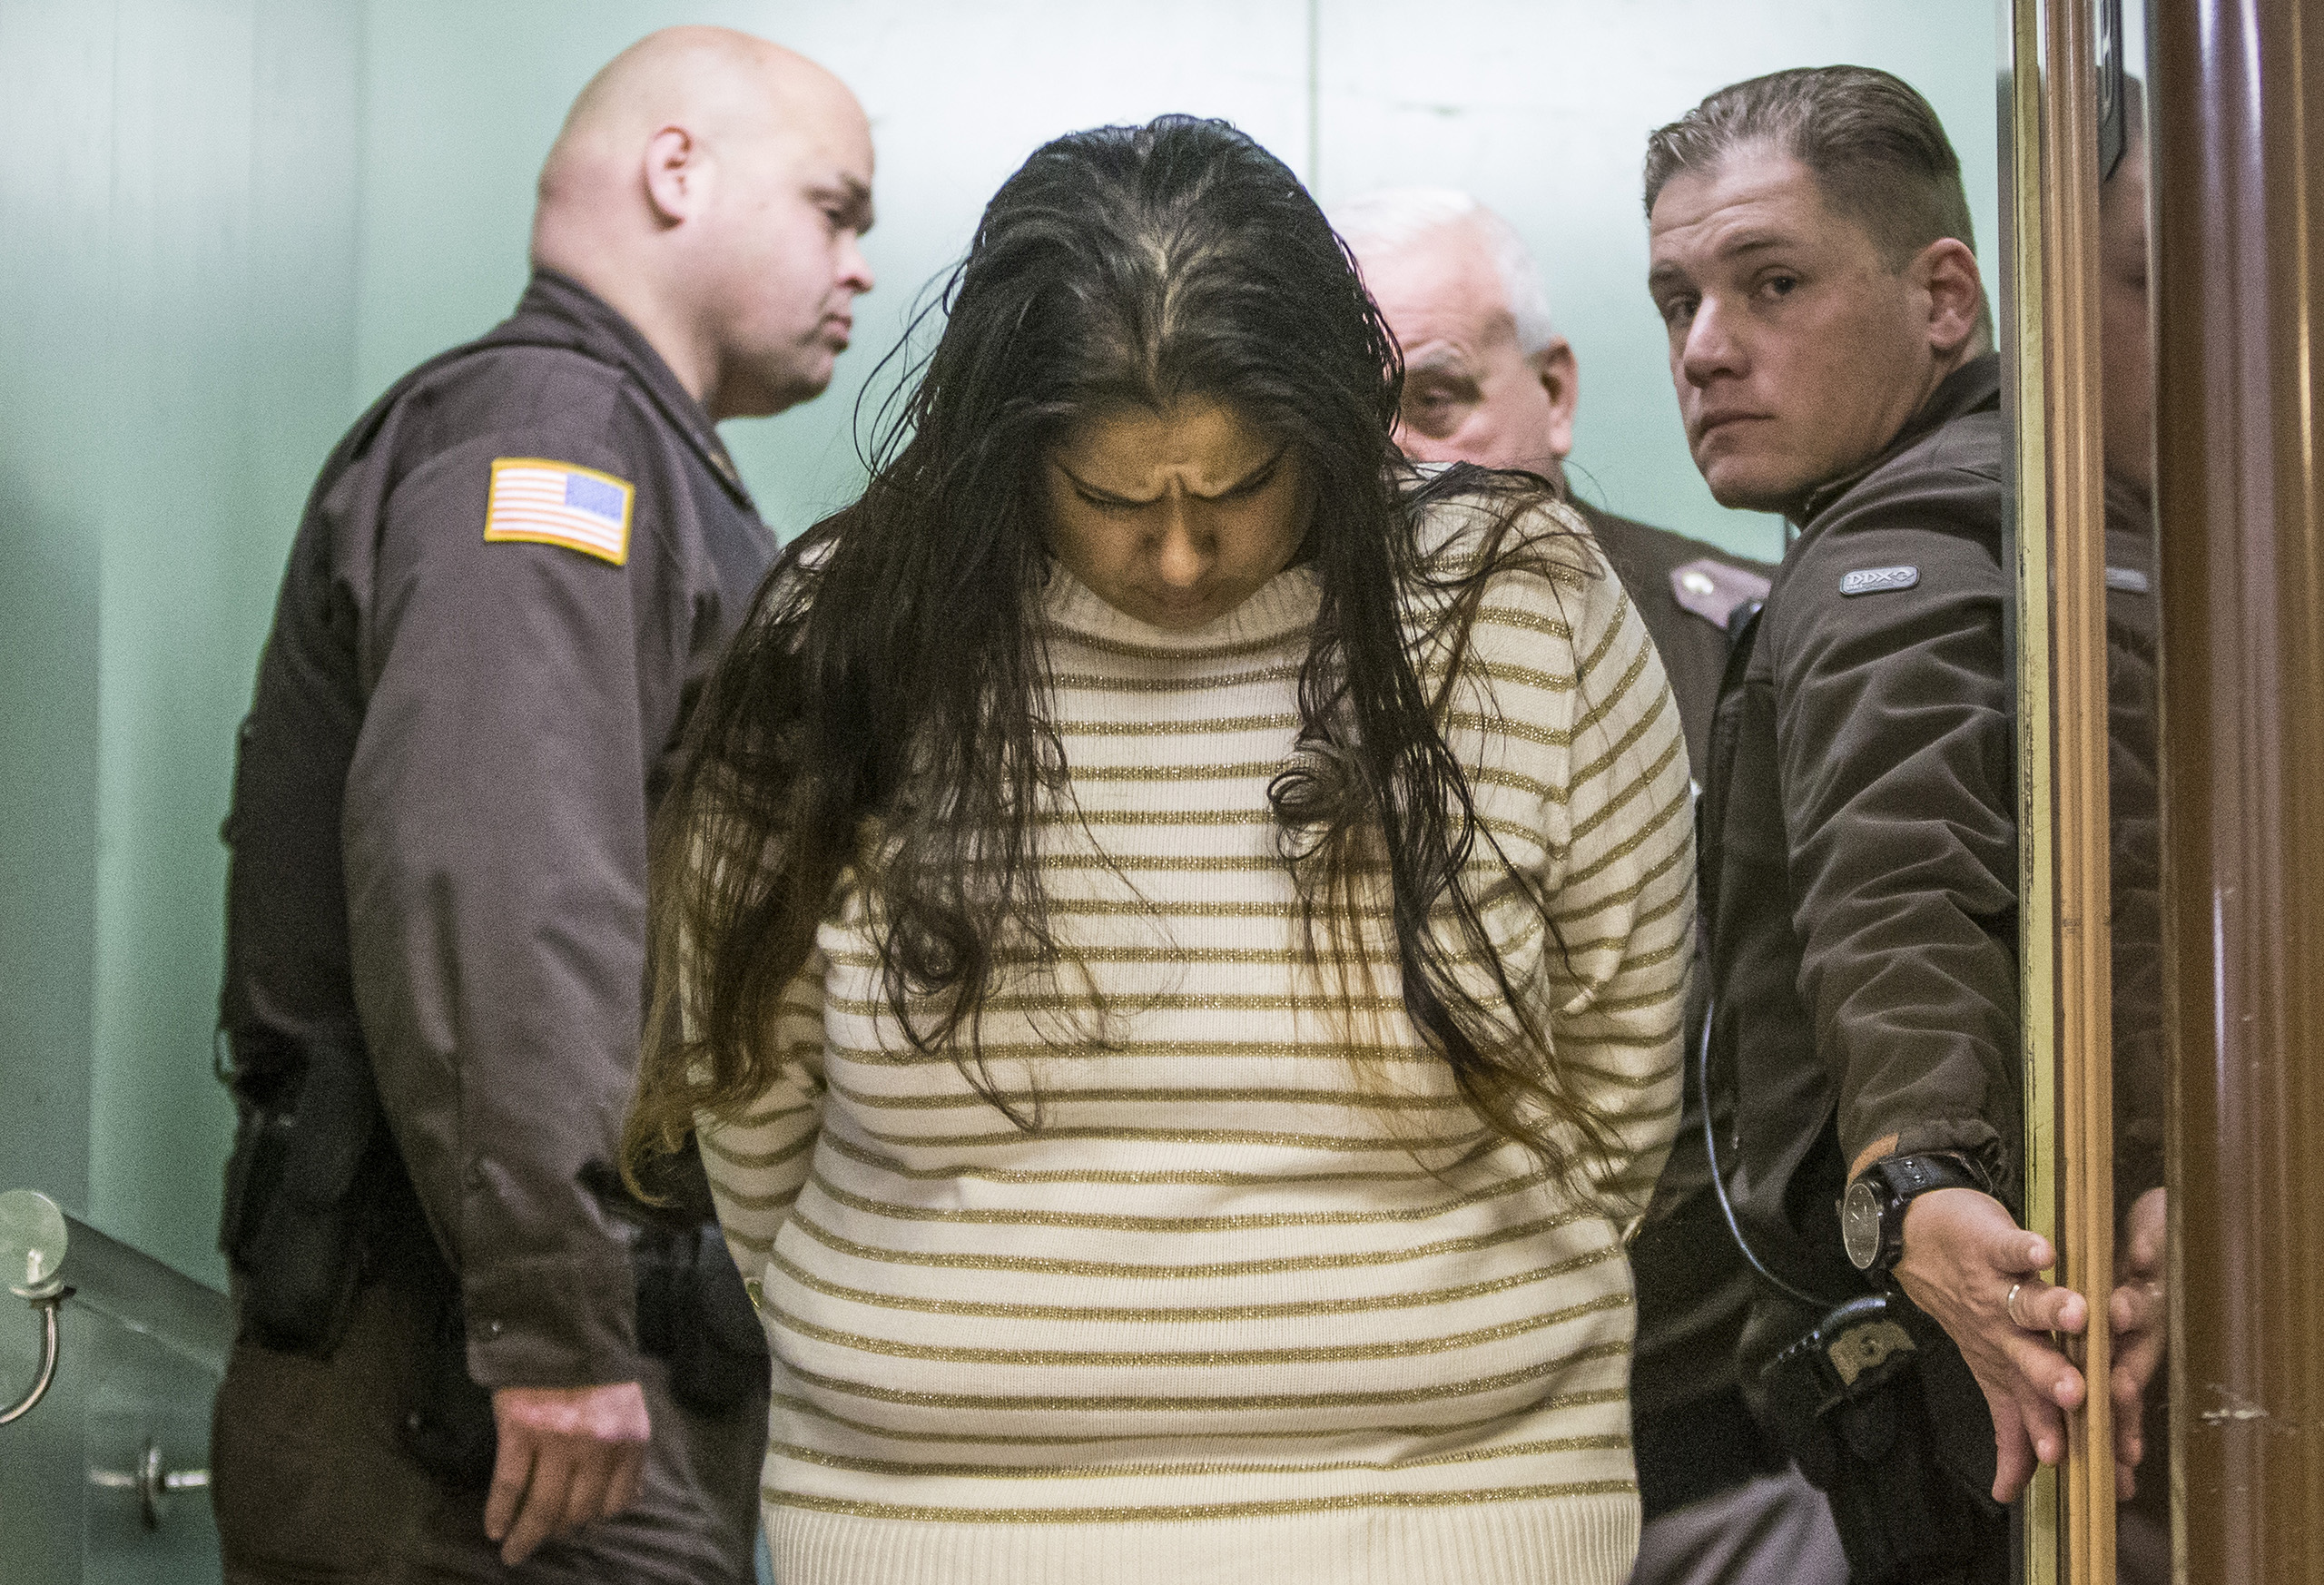 Purvi Patel is taken into custody after being sentenced to 20 years in prison for feticide and neglect of a dependent, at the St. Joseph County Courthouse in South Bend, Indiana, March 30, 2015. (Robert Franklin—AP)